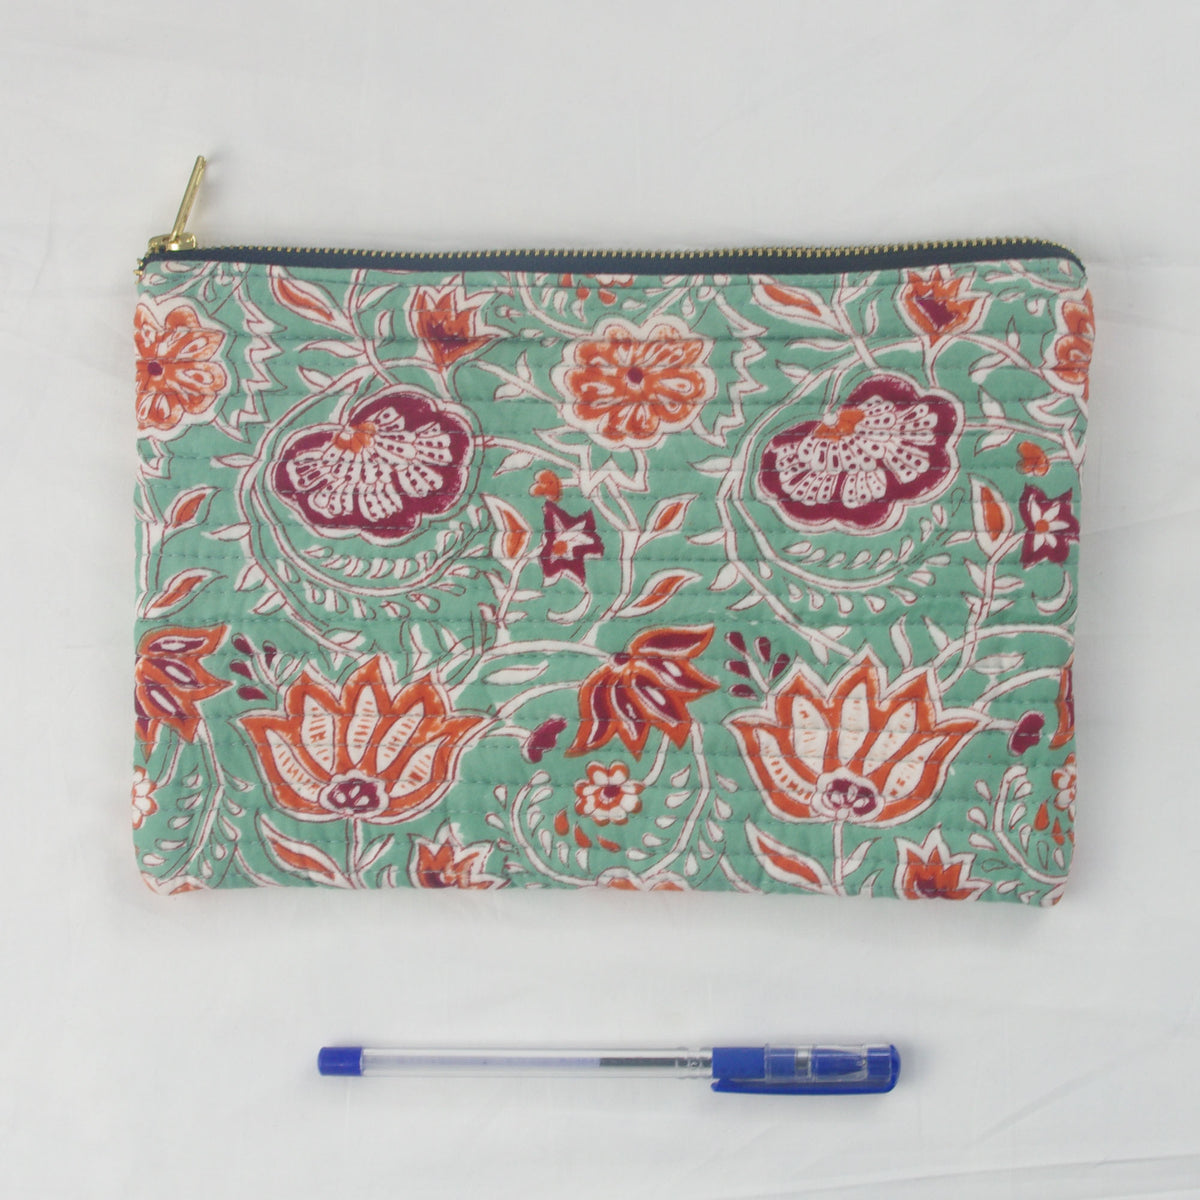 Block Print Makeup Pouch or Pencil Case- Greenish Teal Floral